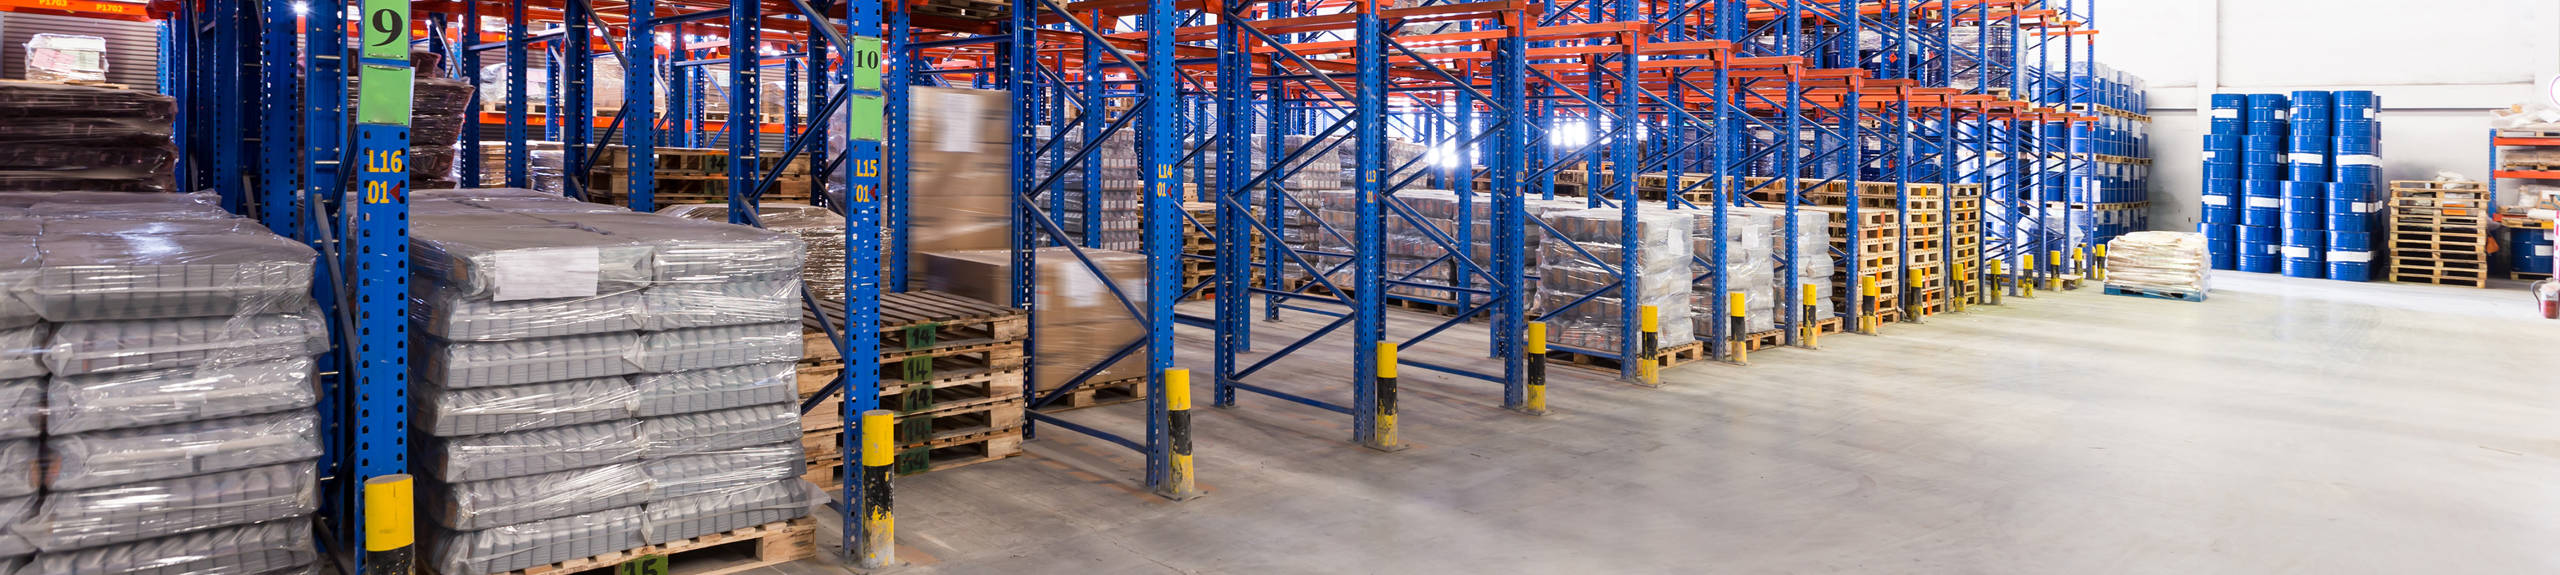 The inside of a warehouse with a concrete floor and rows of industrial-sized shelving.